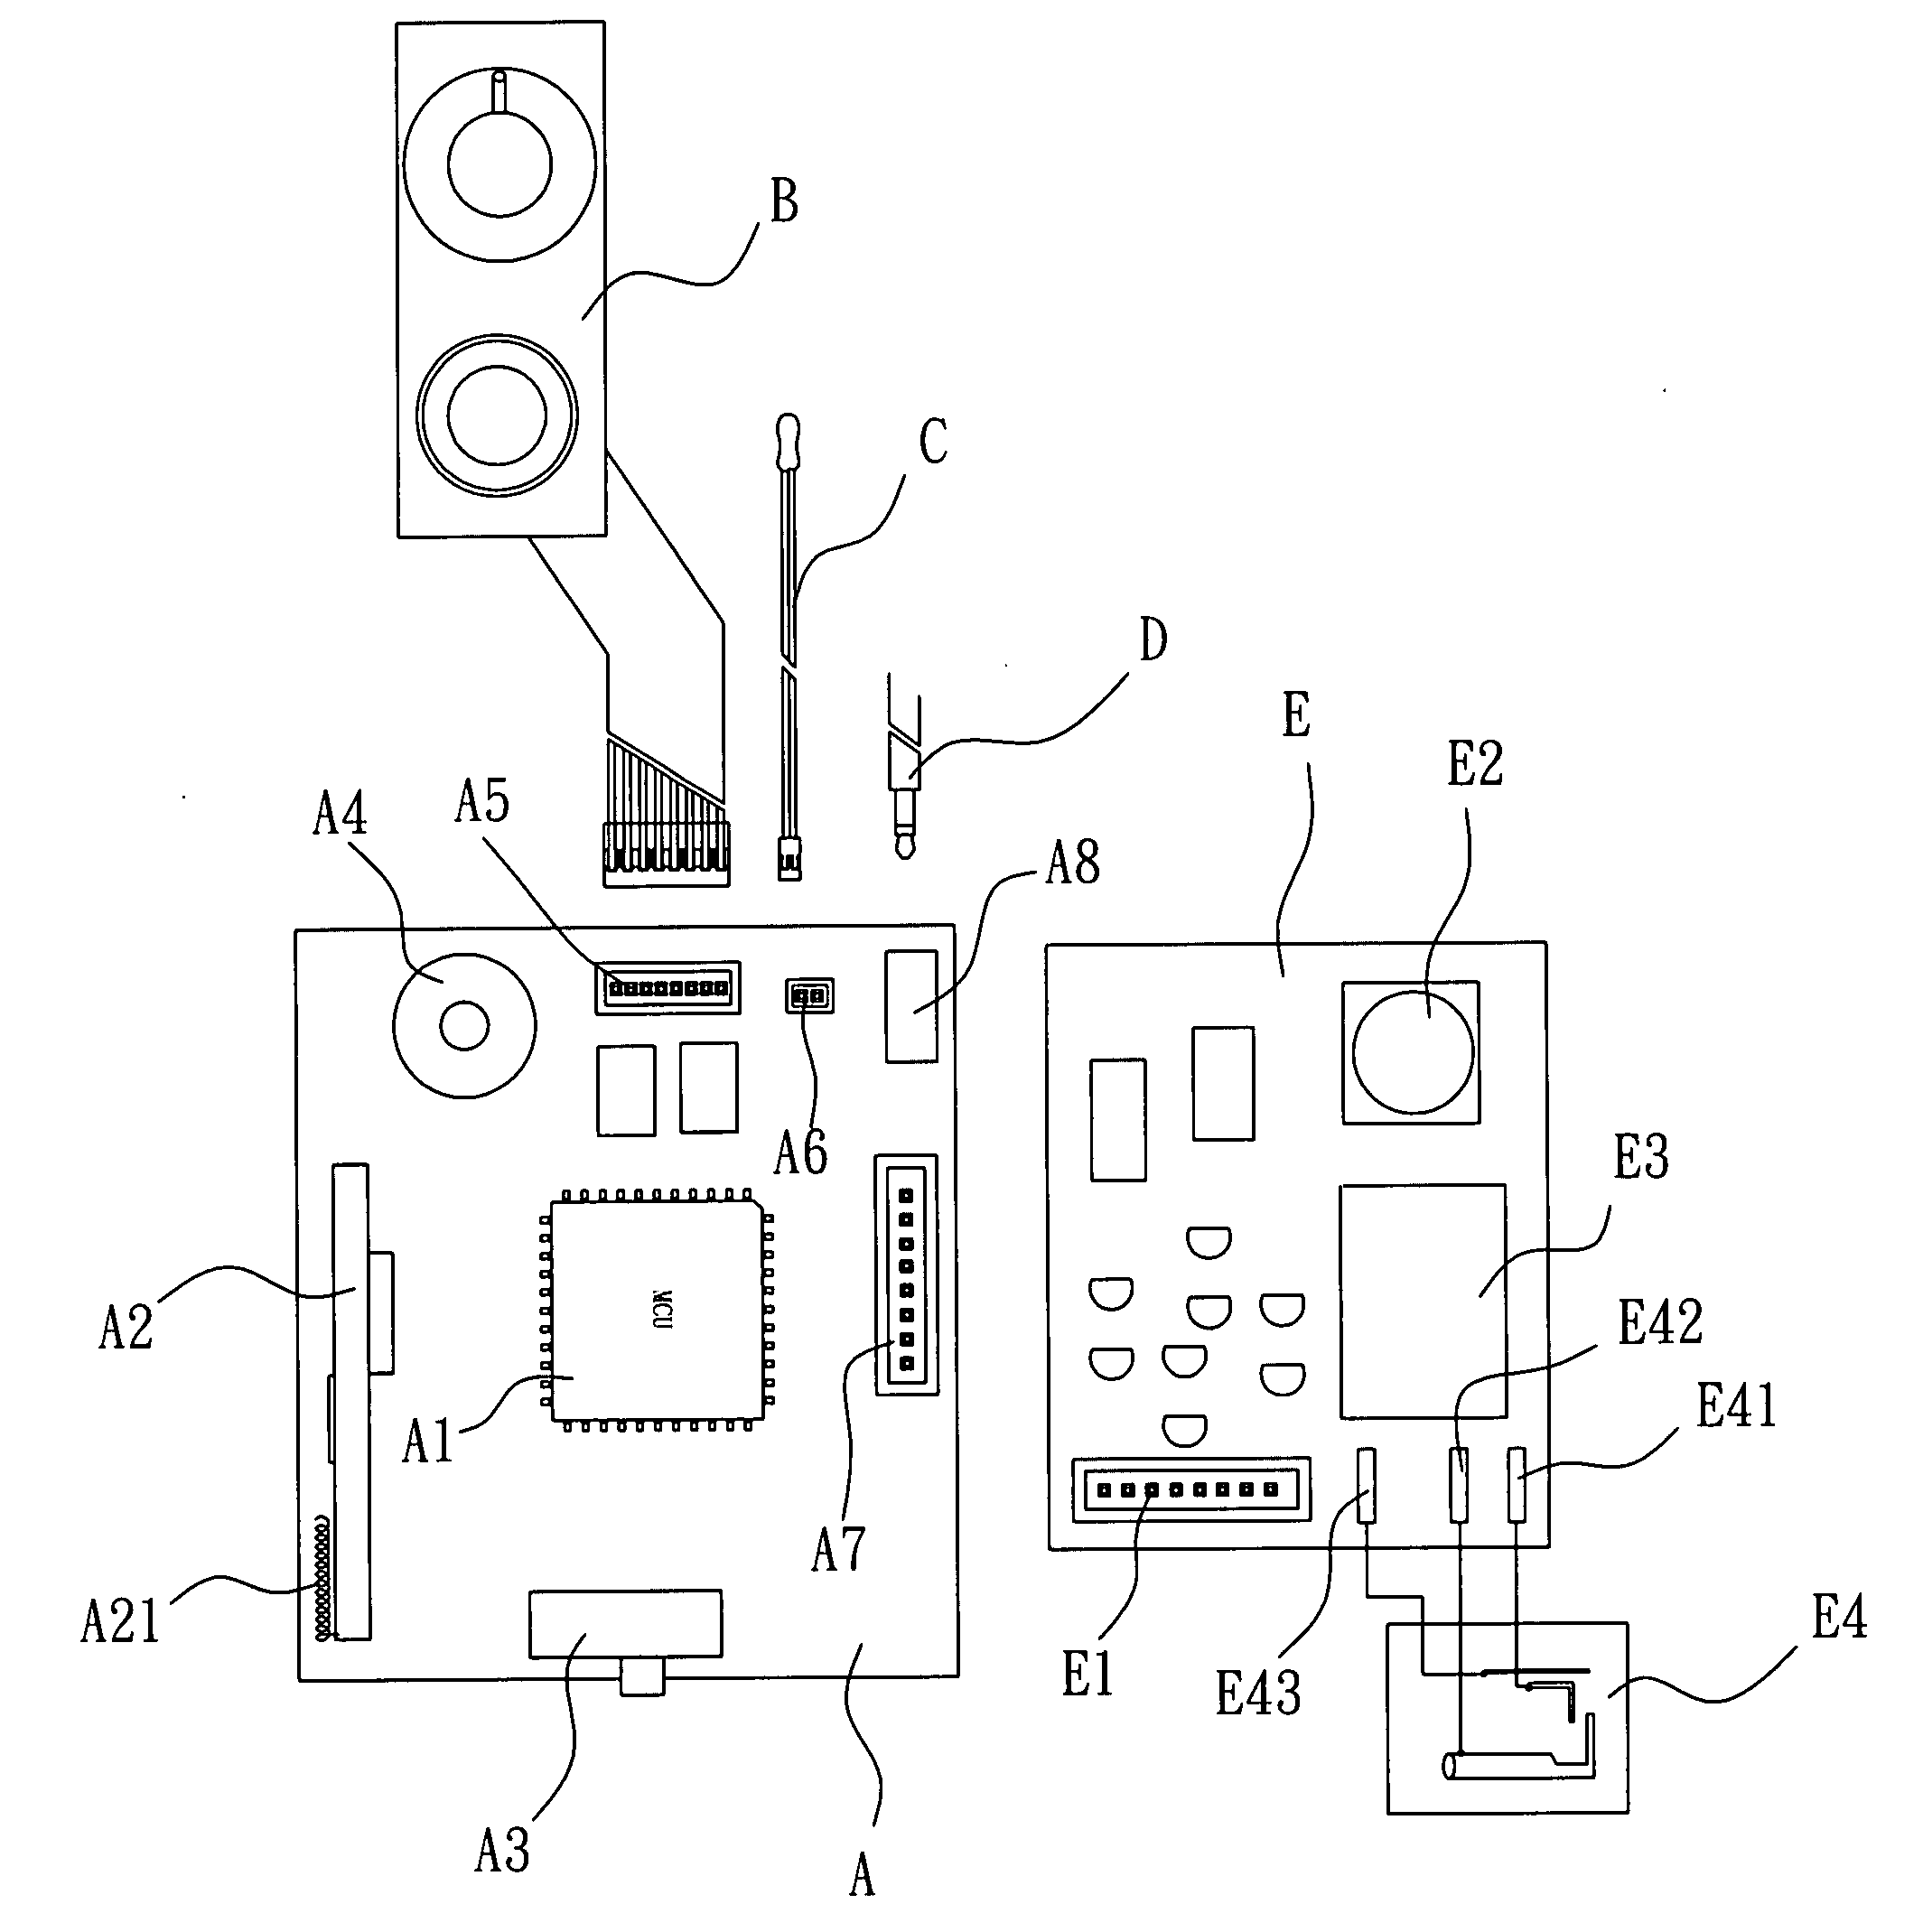 Device for remotely controlling ignition of a gas appliance by transmitting and receiving RF waves